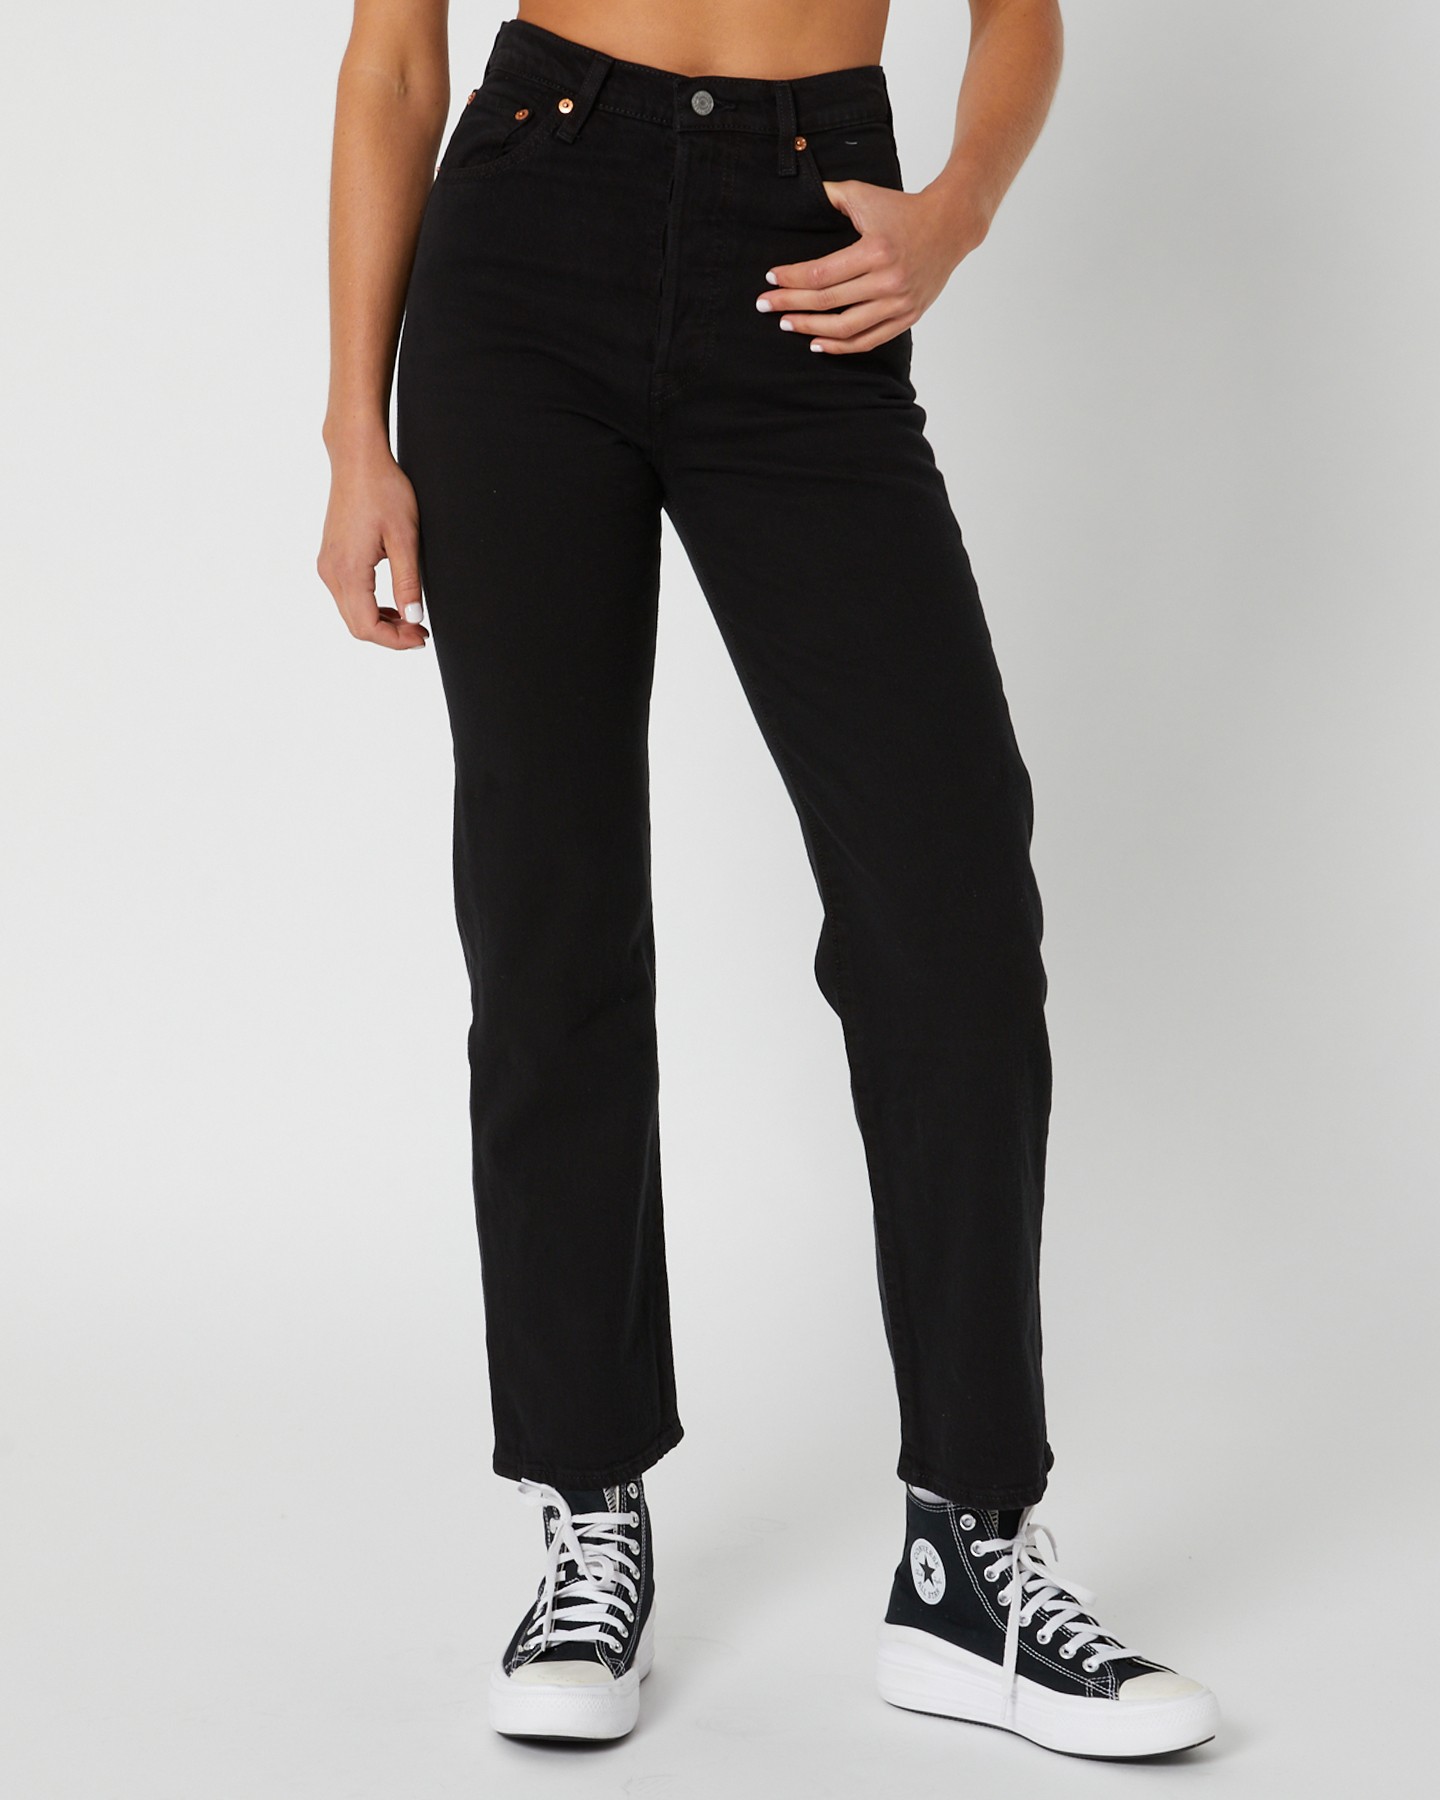 Levi's Ribcage Straight Ankle Jean - Black Heart